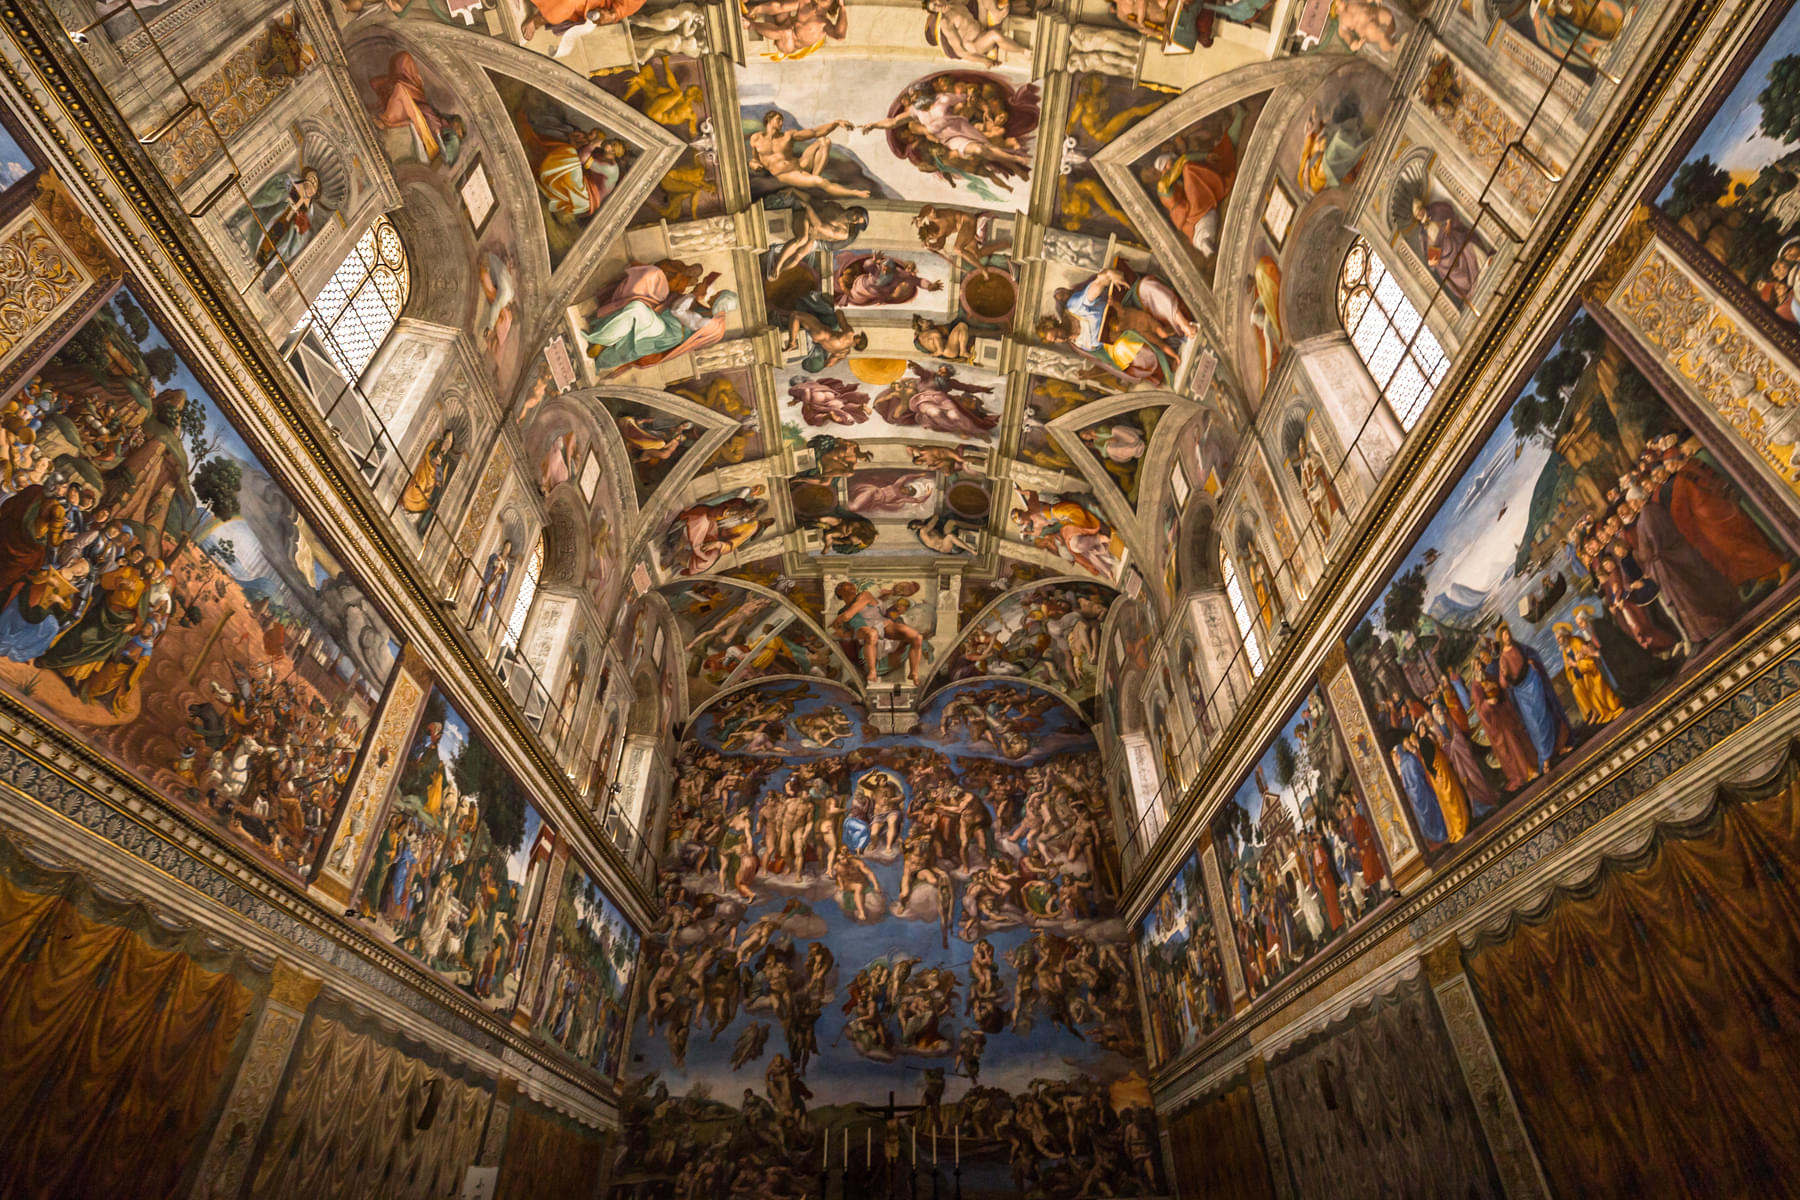 Admire Michelangelo's frescoes of across the ceiling & walls of the Sistine Chapel